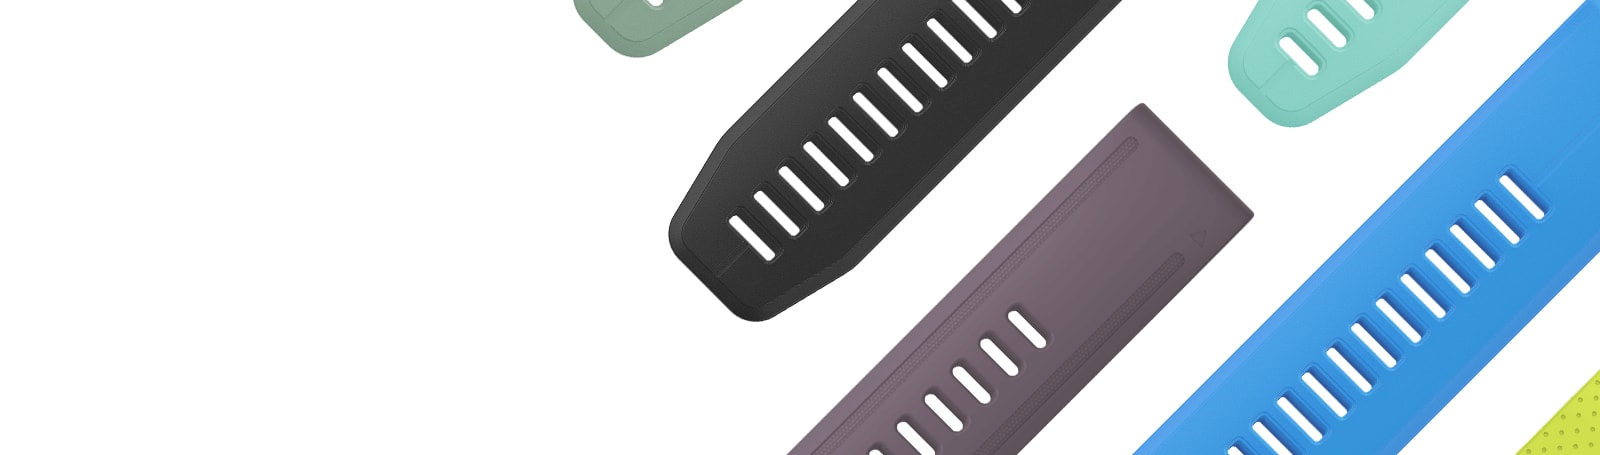 QuickFit® accessory bands let you match your style with no tools required.